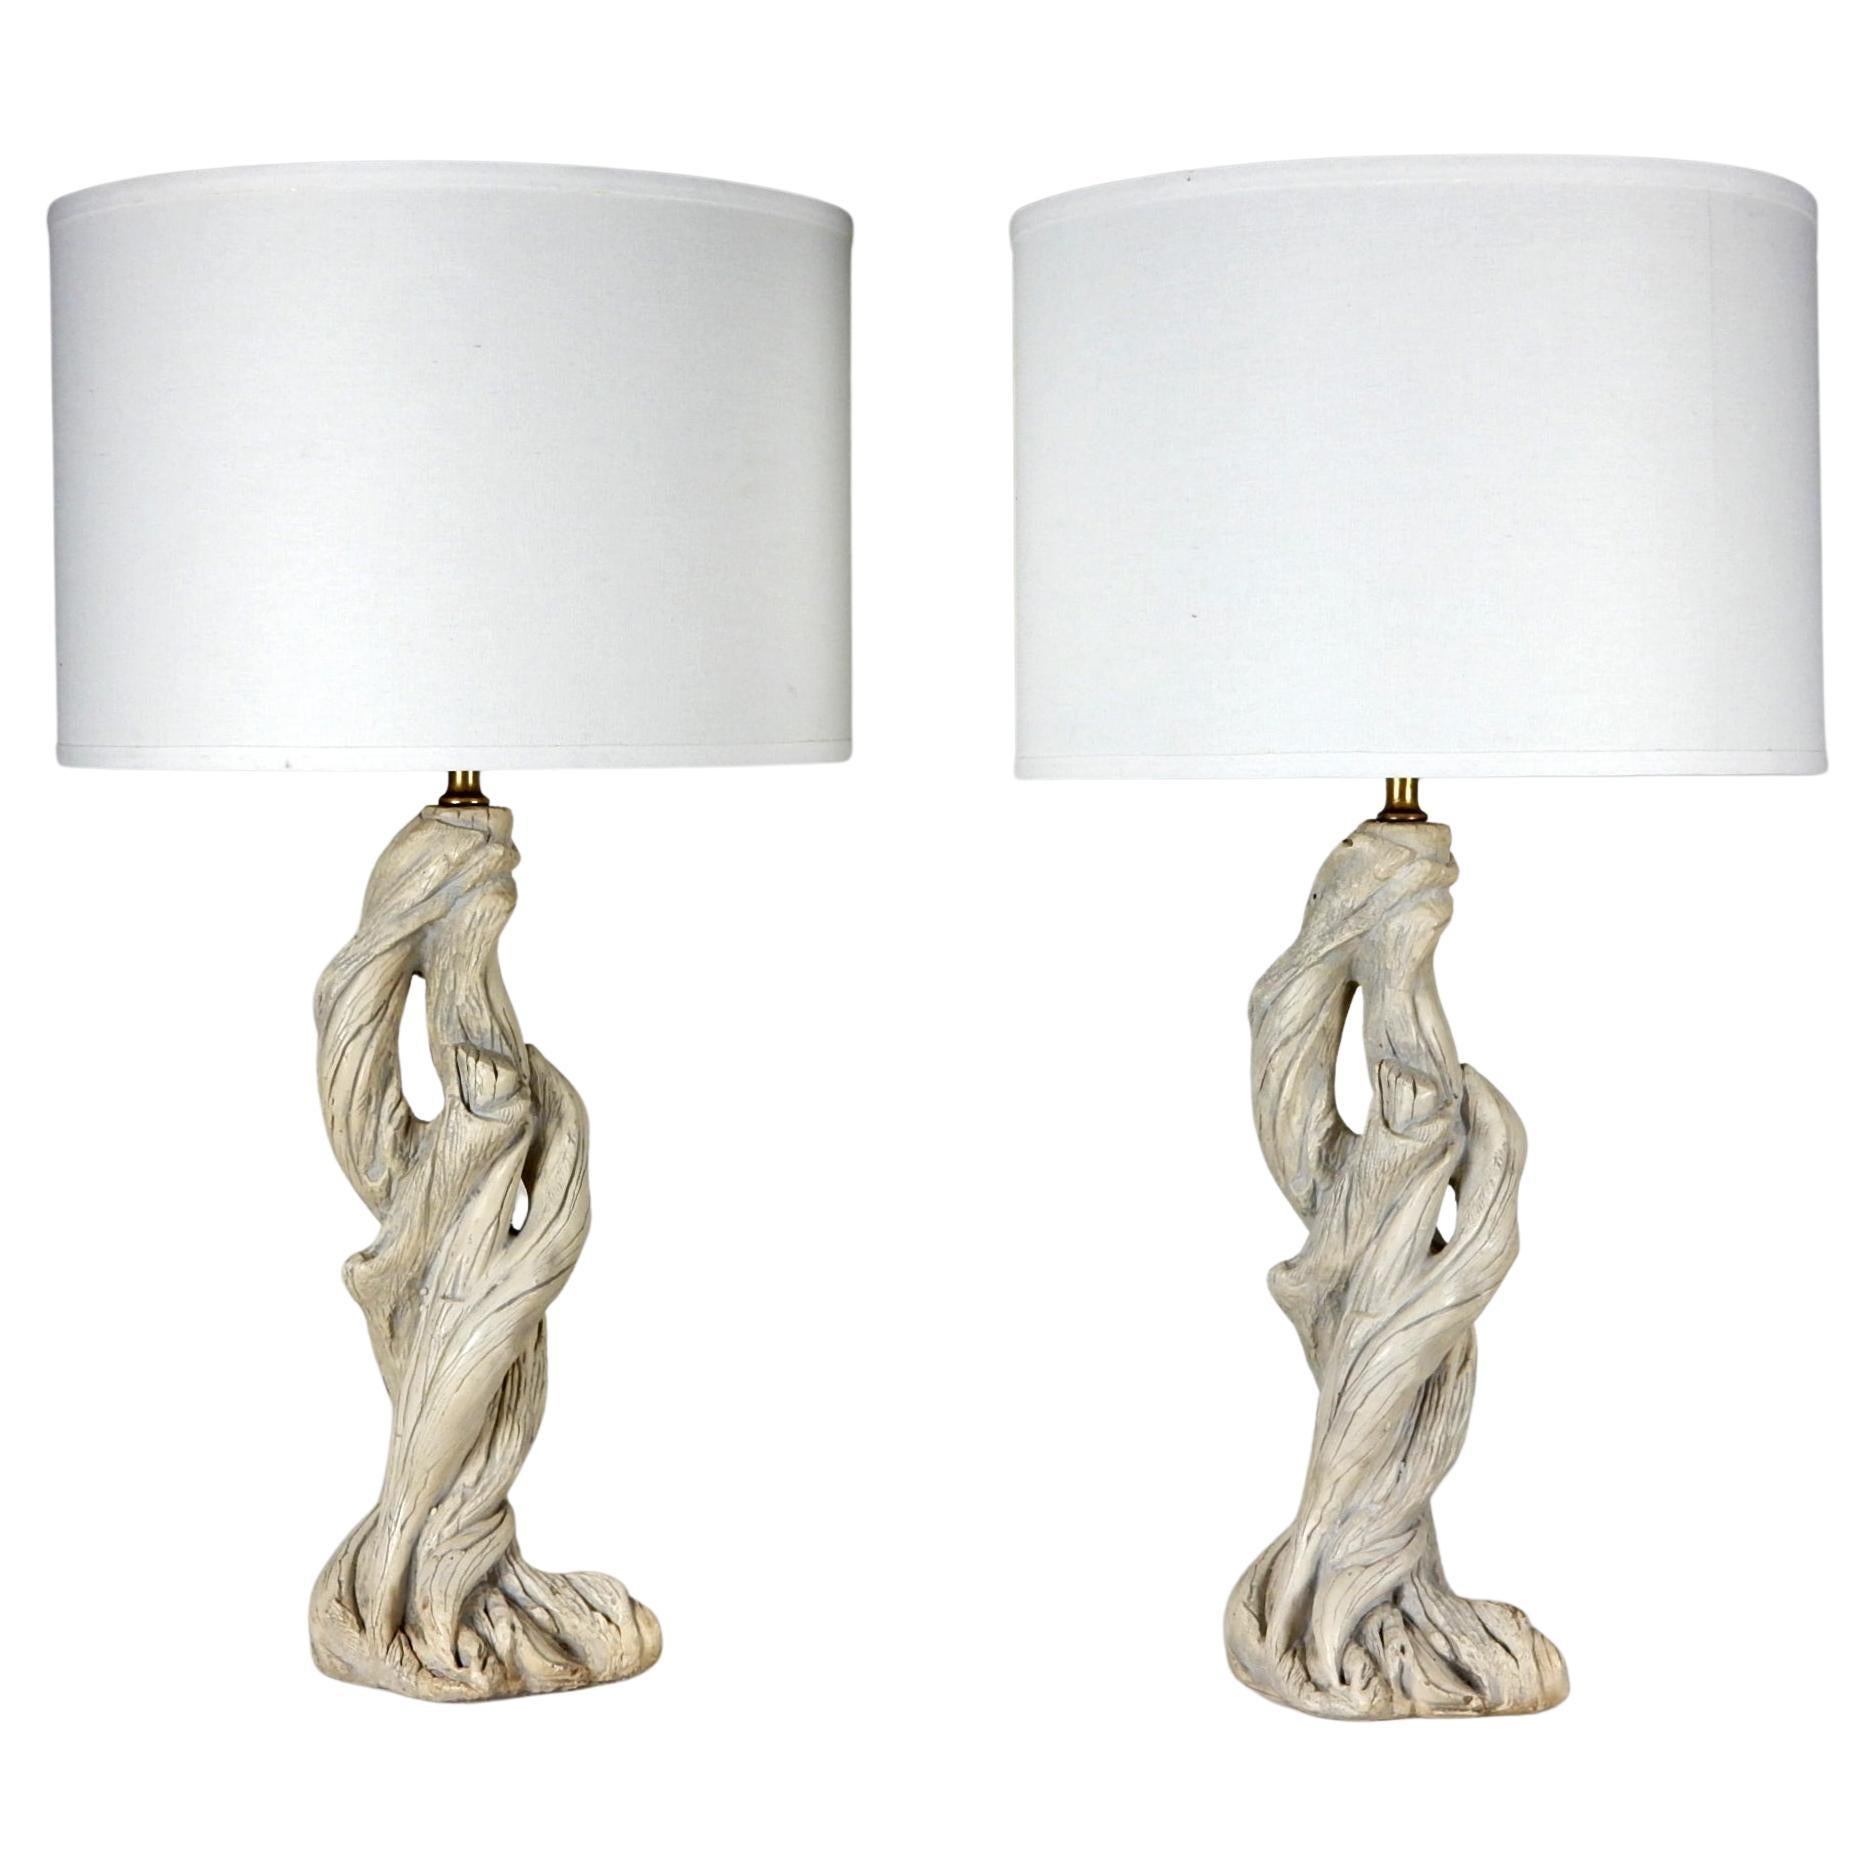 Serge Roche style Faux Bois Wood Plaster Table Lamps For Sale